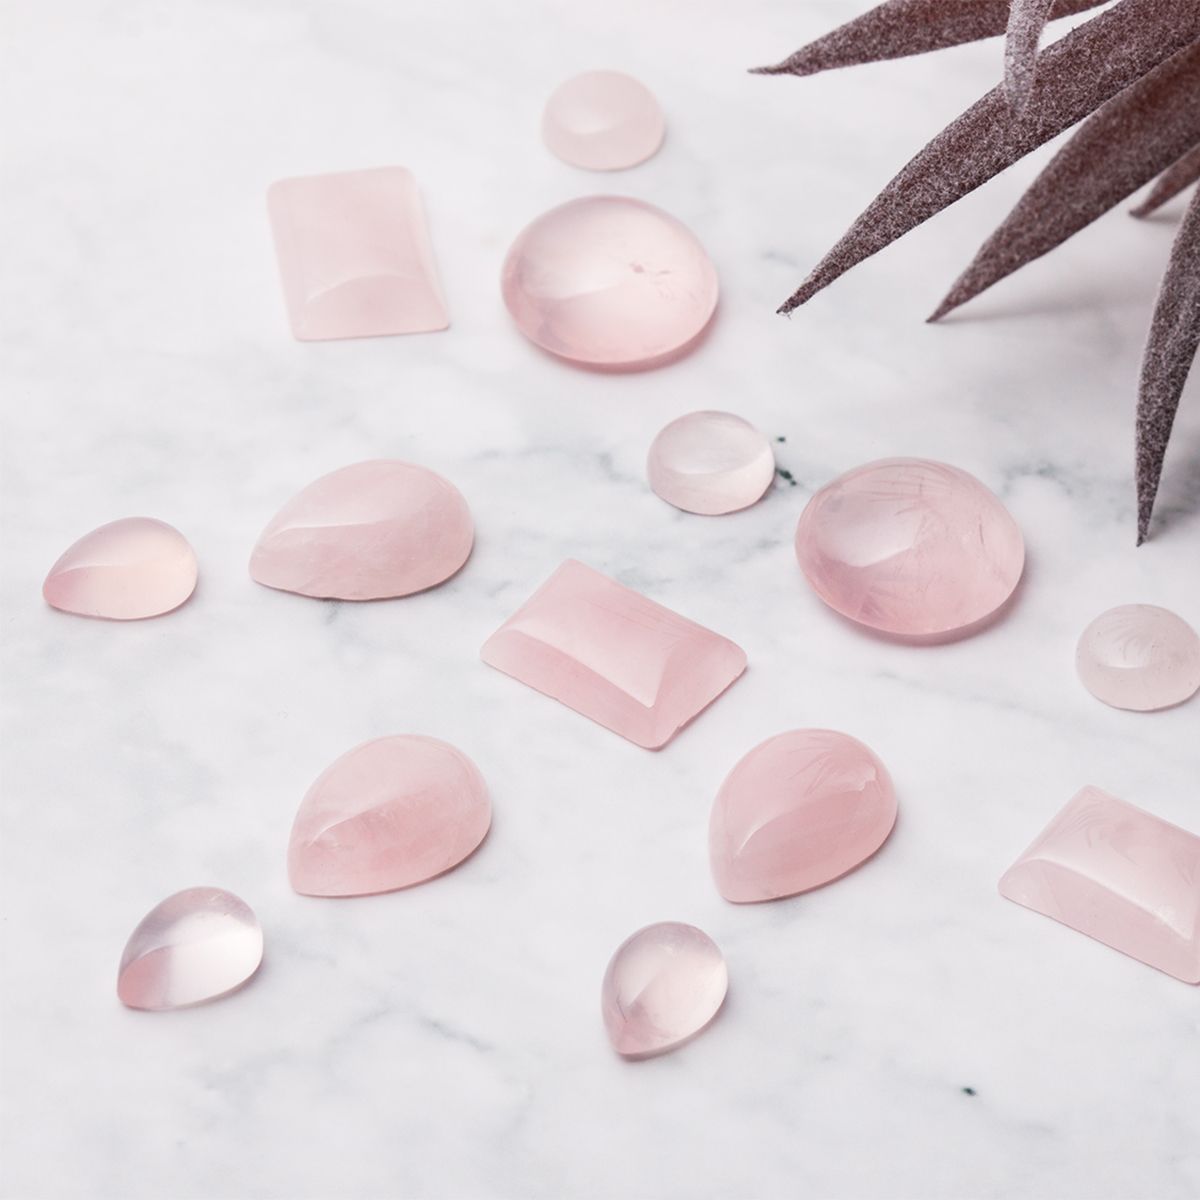 Shop Pink Crystals - Learn The Pink Crystal Meaning